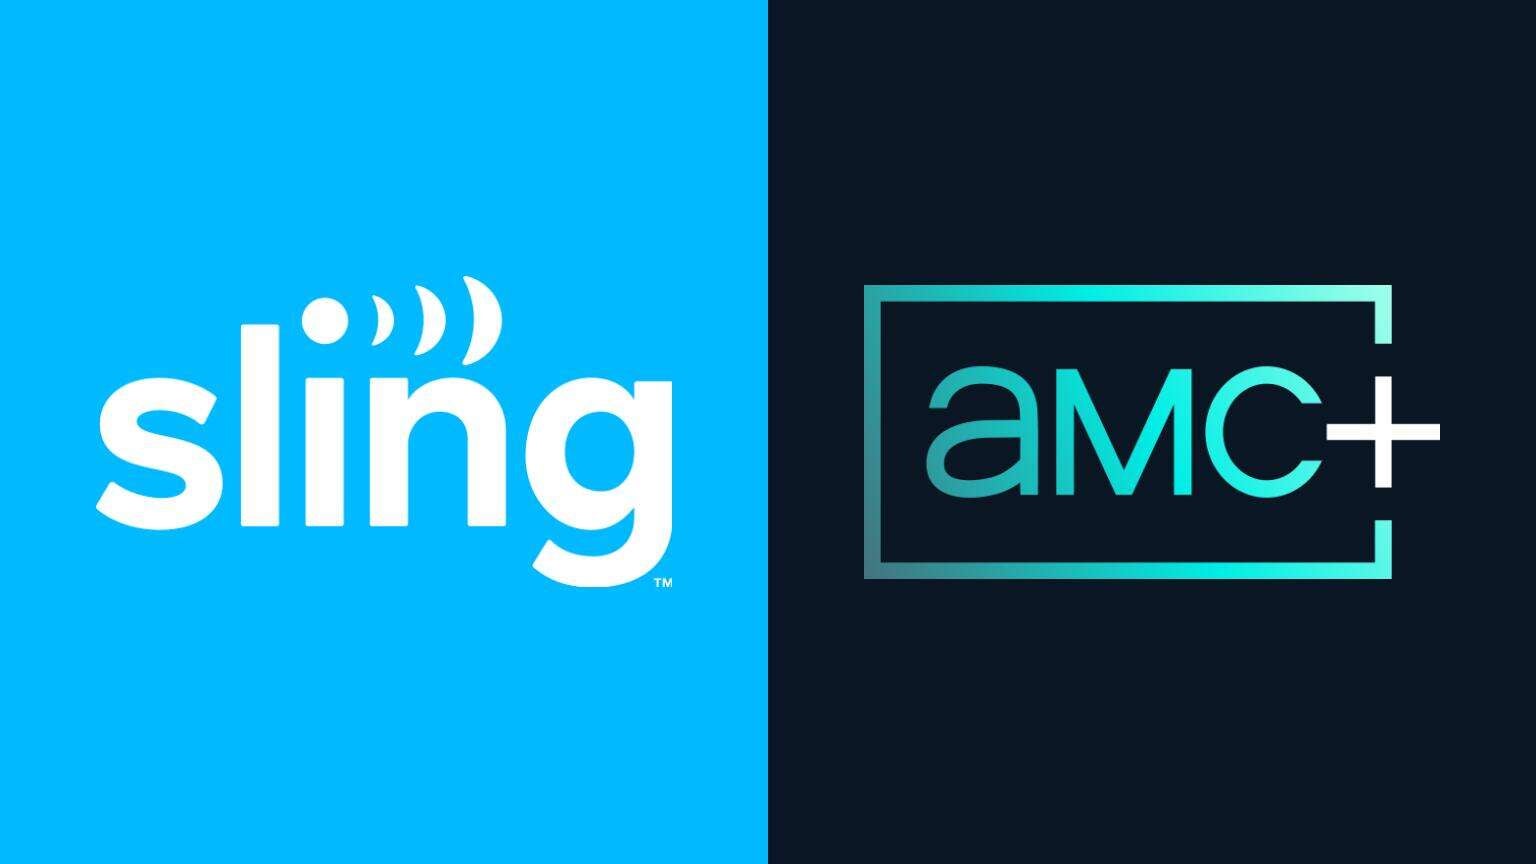 Sling TV Offers AMC+ Free All Weekend as Freeview Weekends Continue